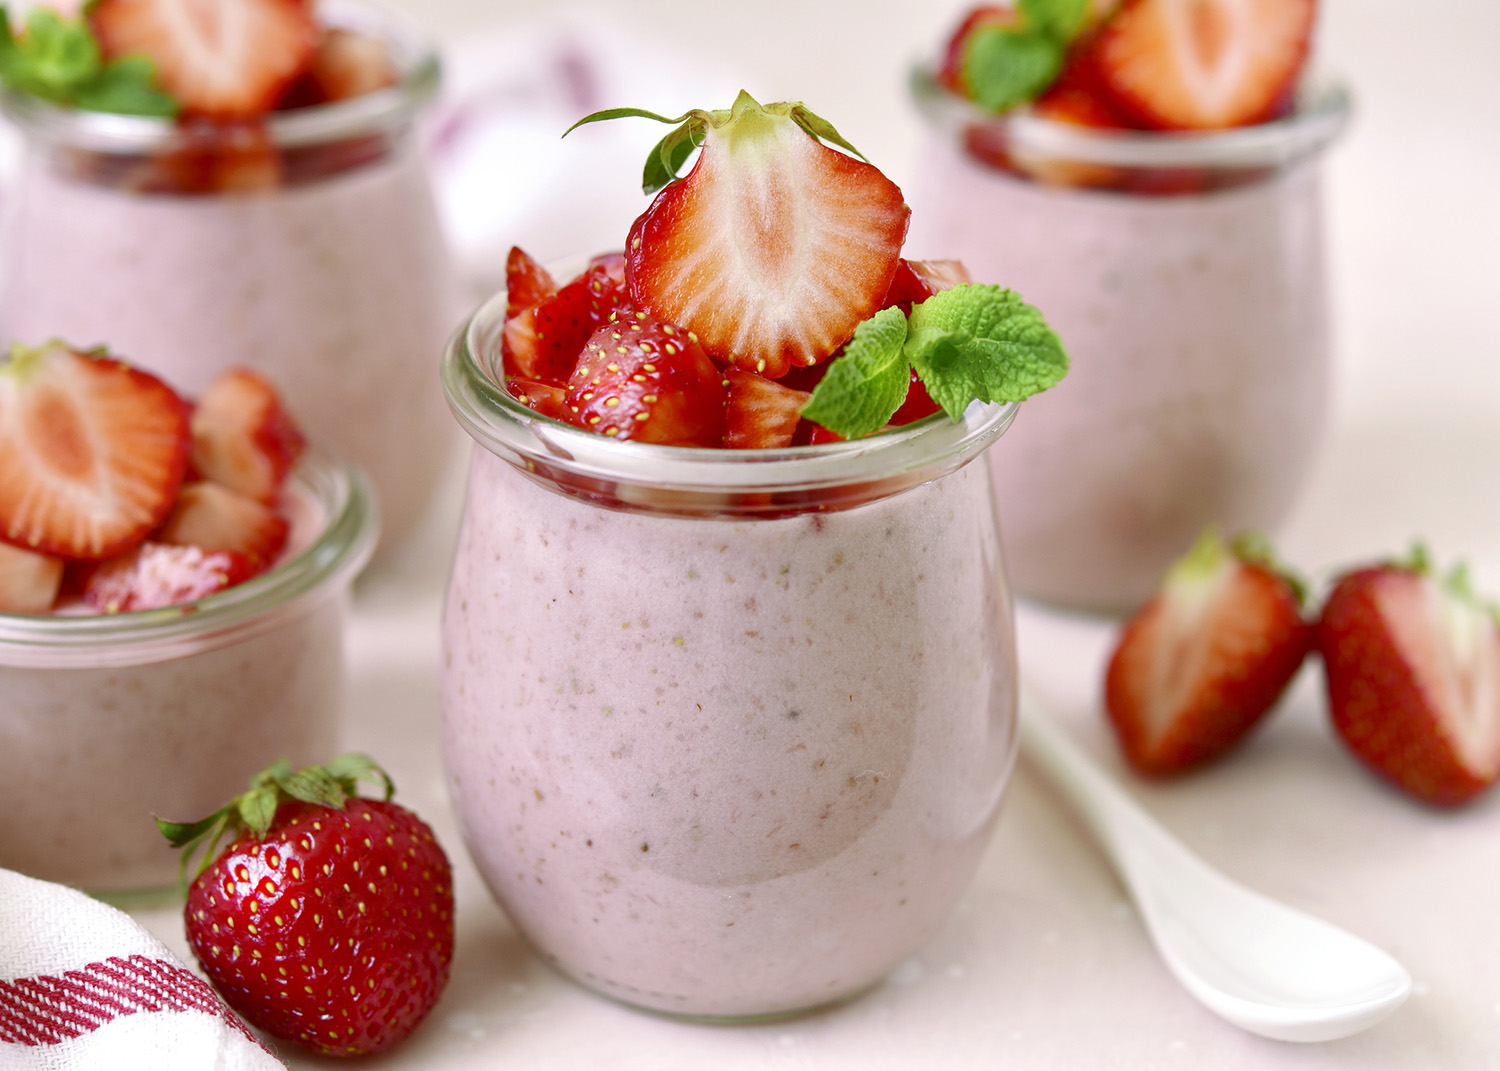 Homemade strawberry mousse in a vintage glass jar on a light slate, stone or concrete background.